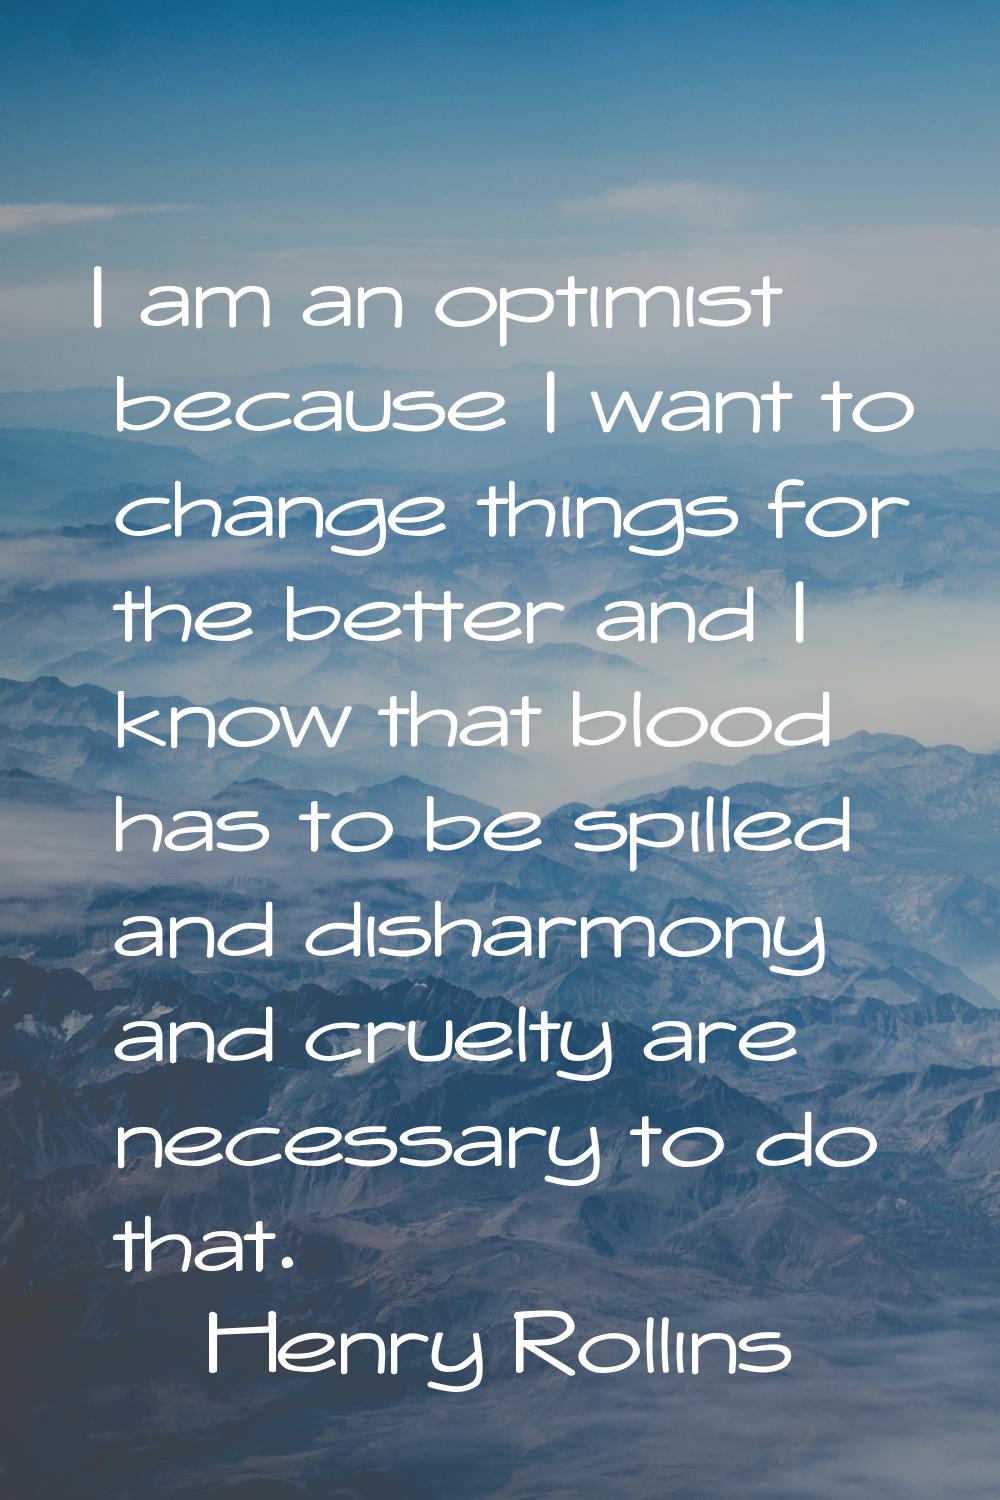 I am an optimist because I want to change things for the better and I know that blood has to be spi